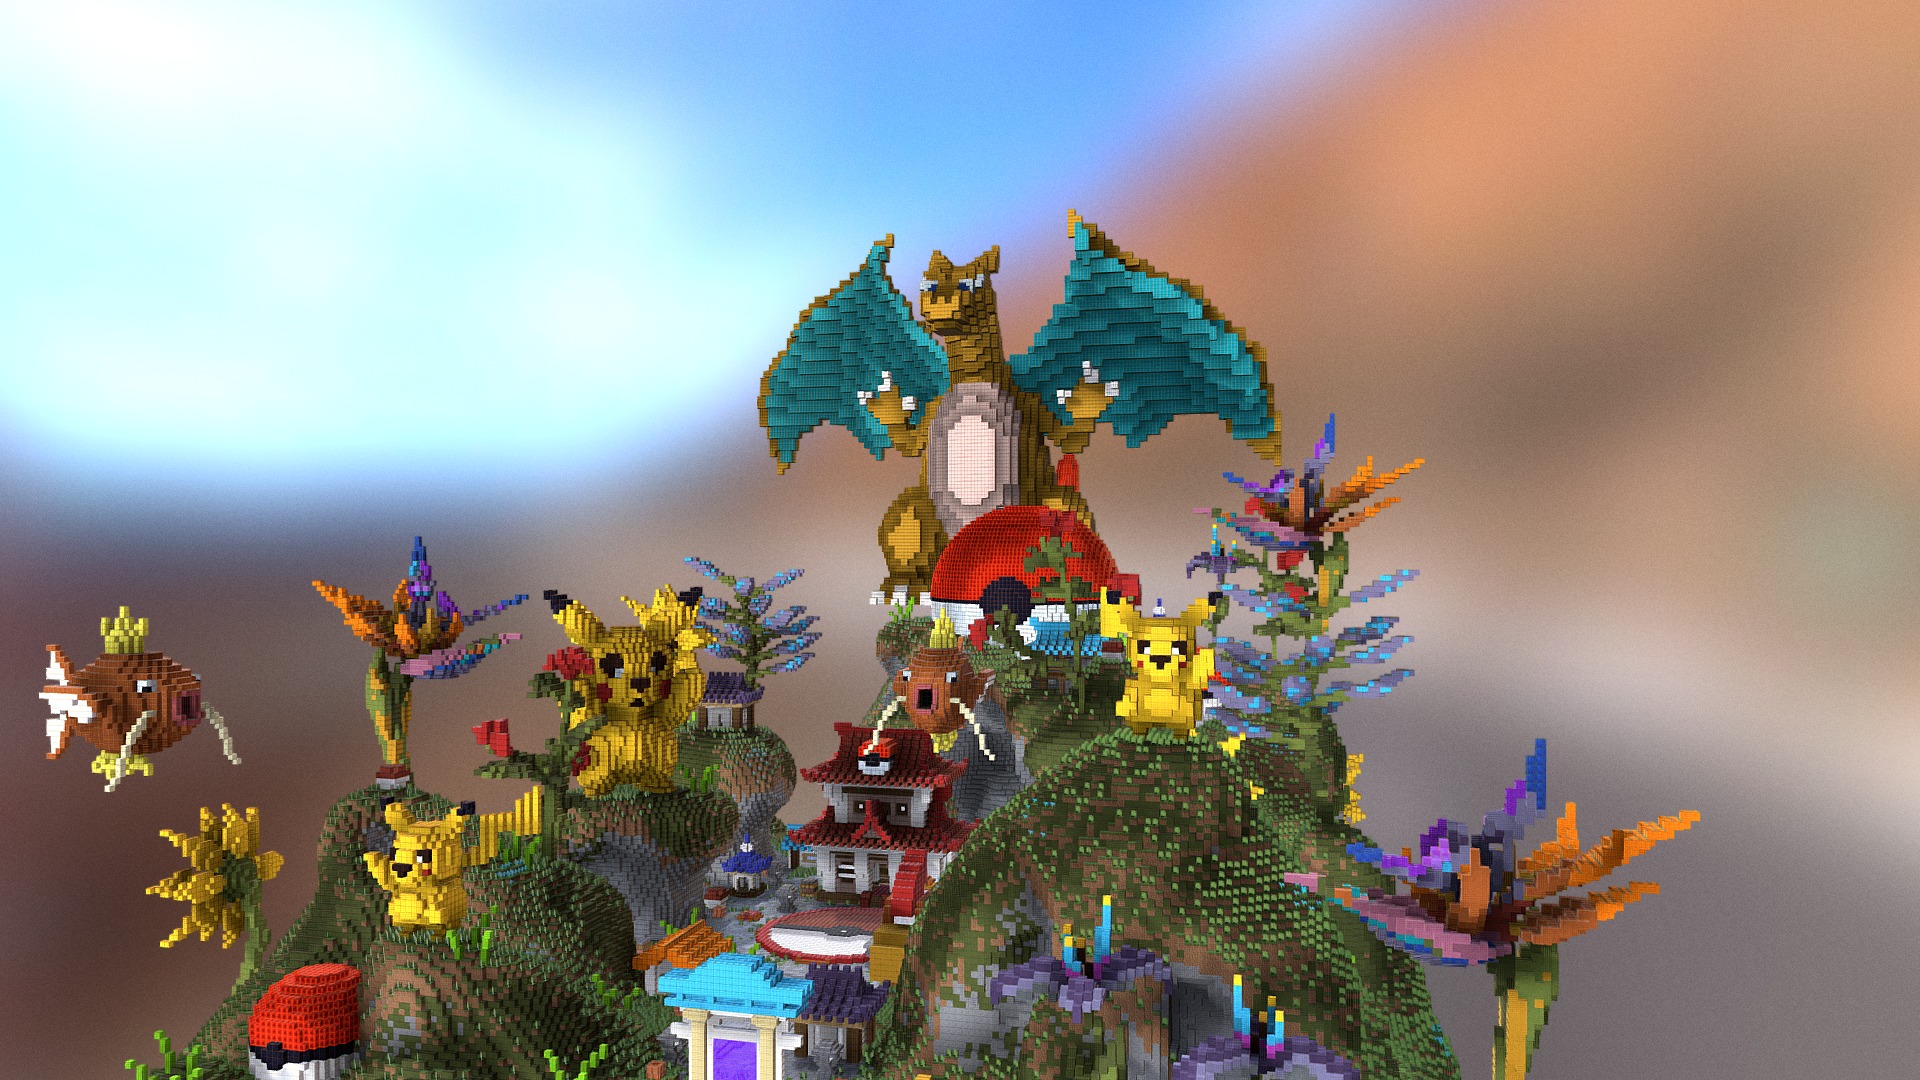 3D model PokeGarden Spawn - This is a 3D model of the PokeGarden Spawn. The 3D model is about a cartoon of a colorful castle.